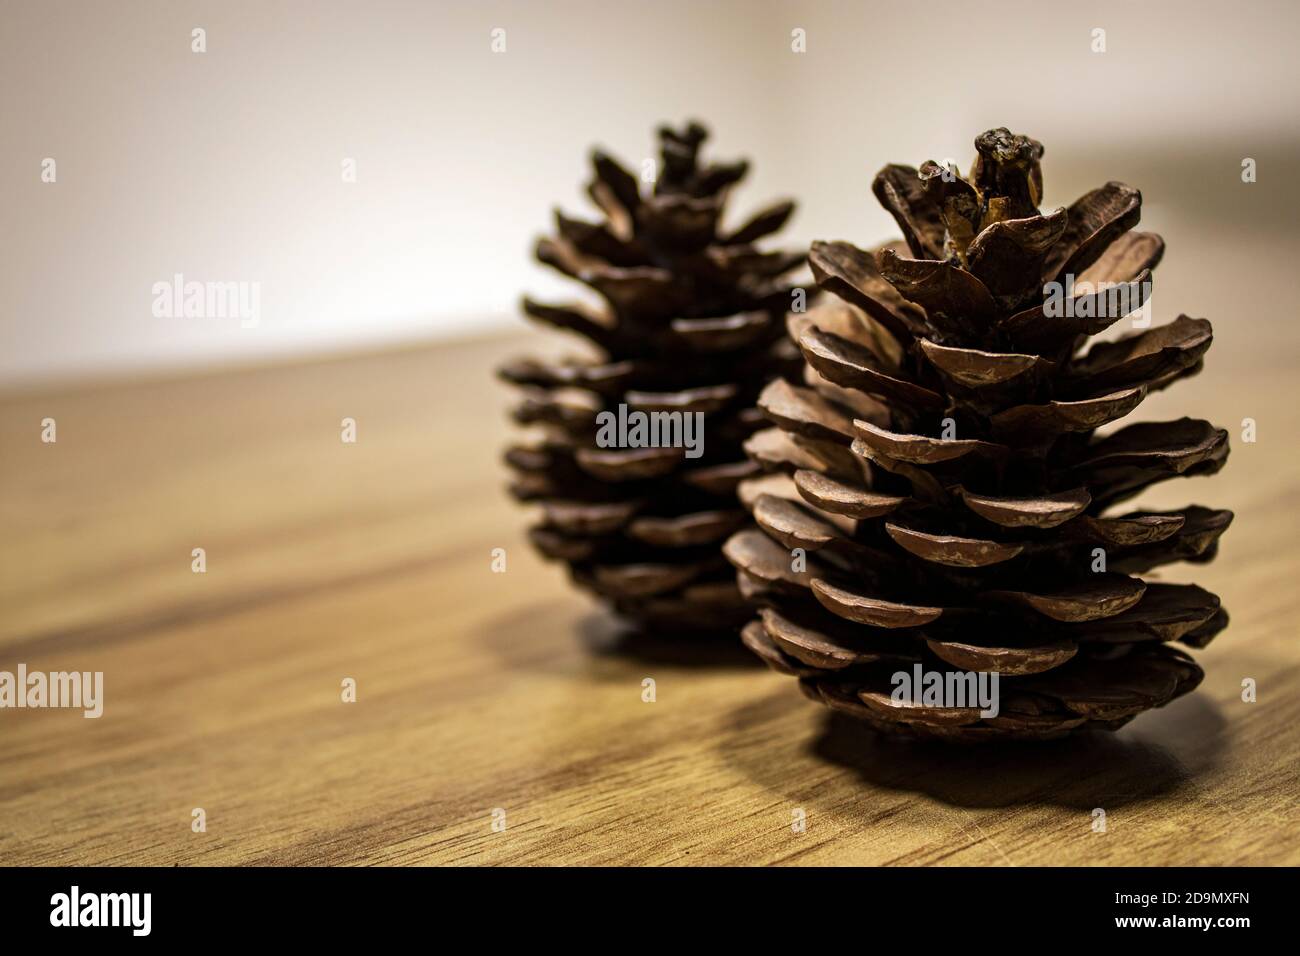 Two pine cones standing upright on the wooden table. Stock Photo